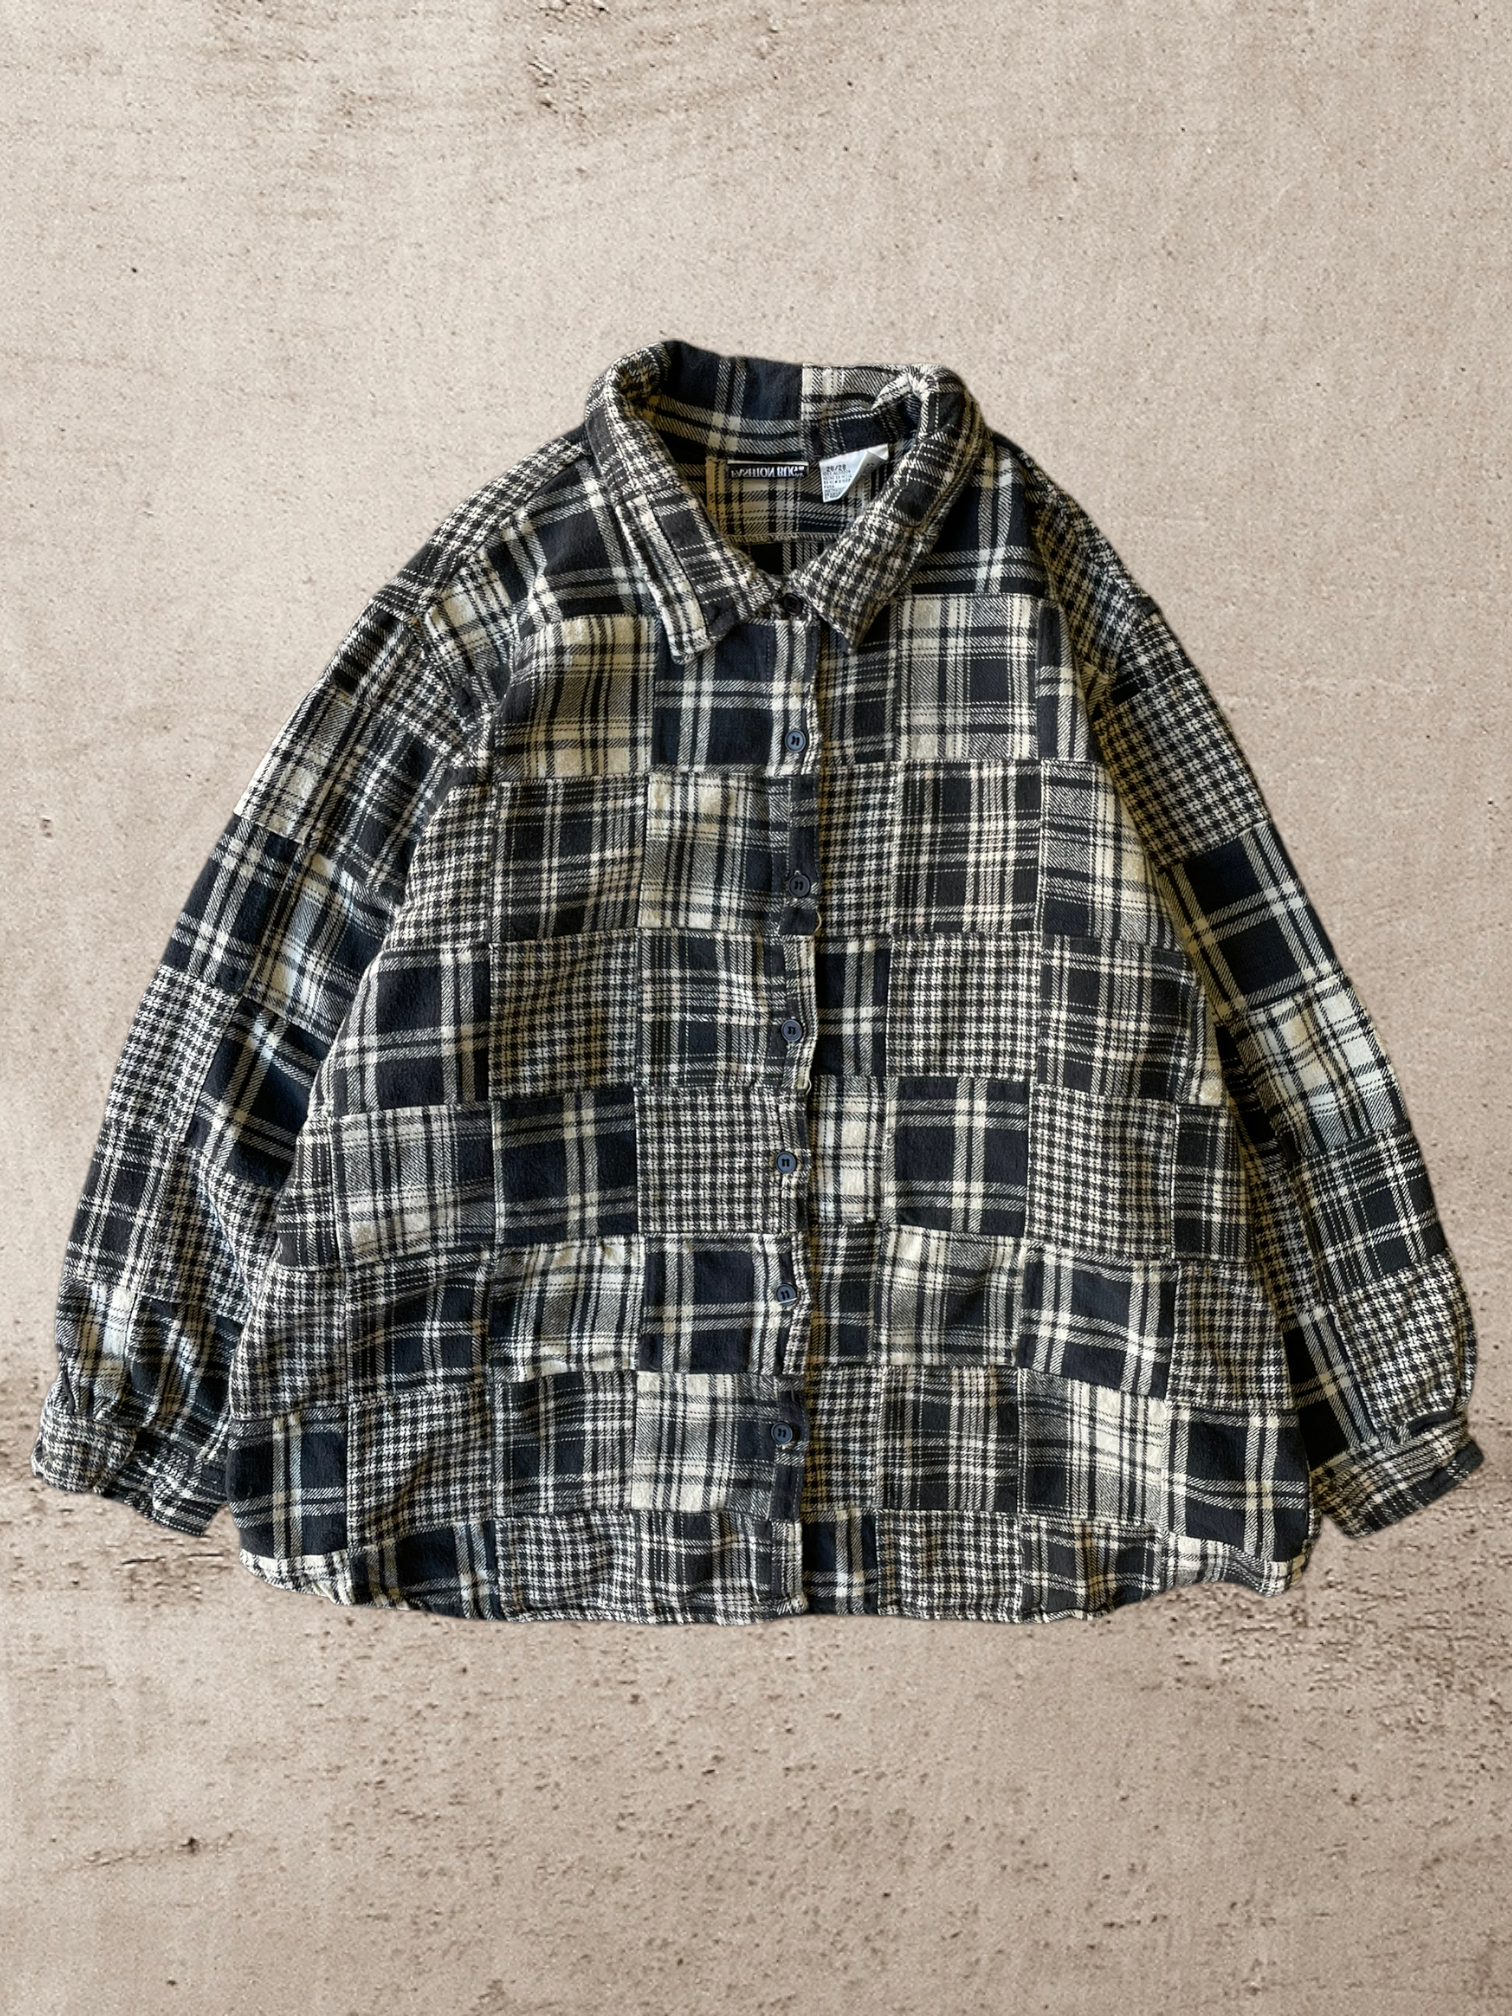 90s Patchwork Cut n Sew Flannel - X-Large